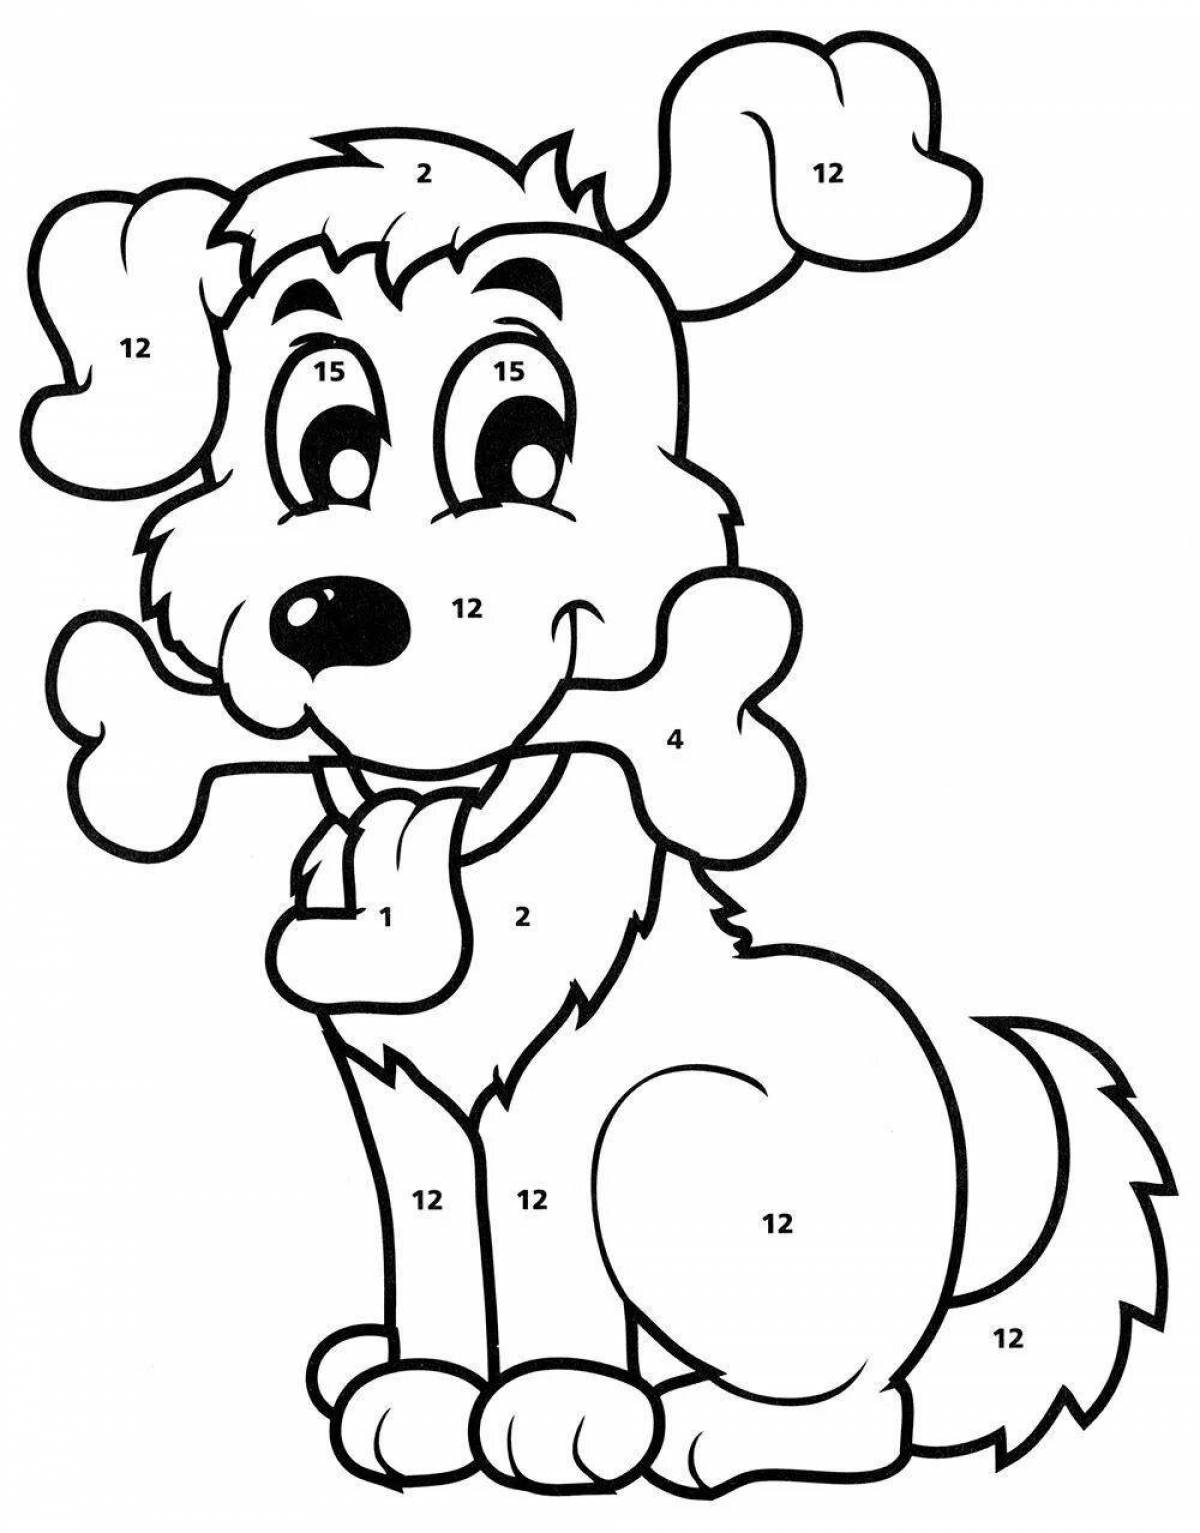 Colorful dog coloring page by numbers